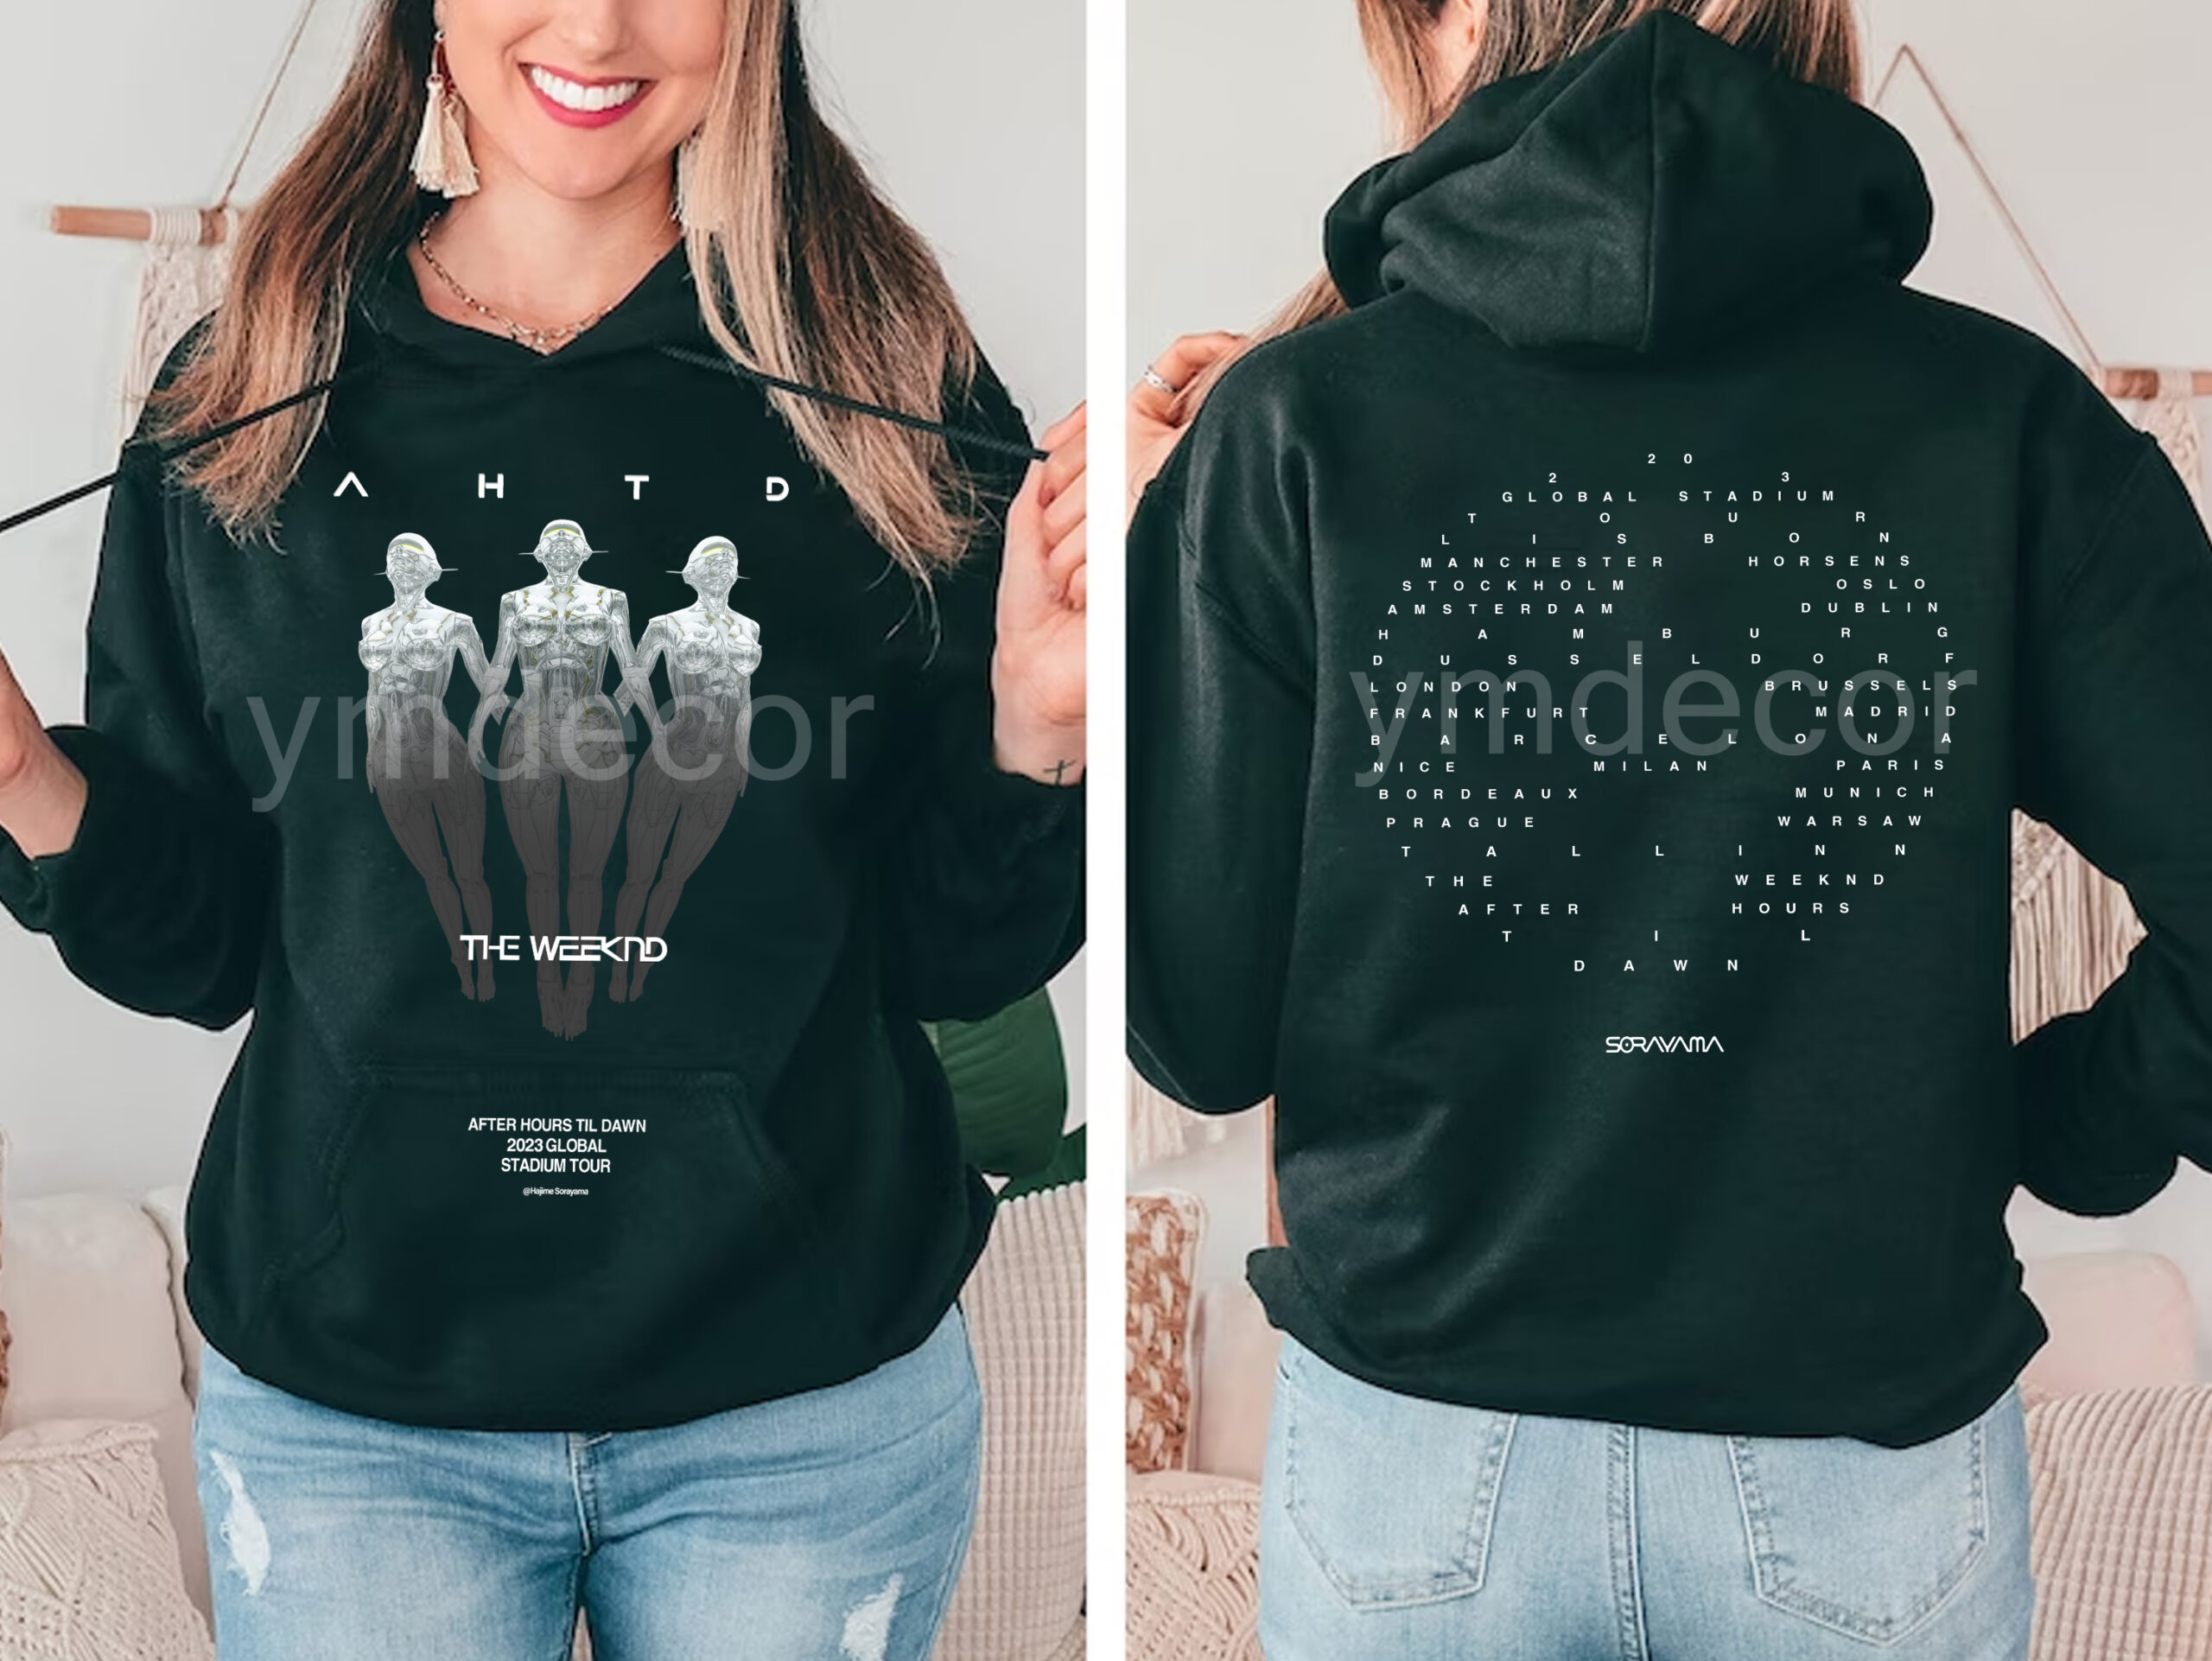 The After Hours Til Dawn 2023 Tour 2 Sides Hoodie, After Hours Tour Concert  Tshirt, MuicMuTour 2023 Merch Sweatshirt, Hoodie, Unisex Shirt (Copy)  (Copy) - YMdecor Home Store